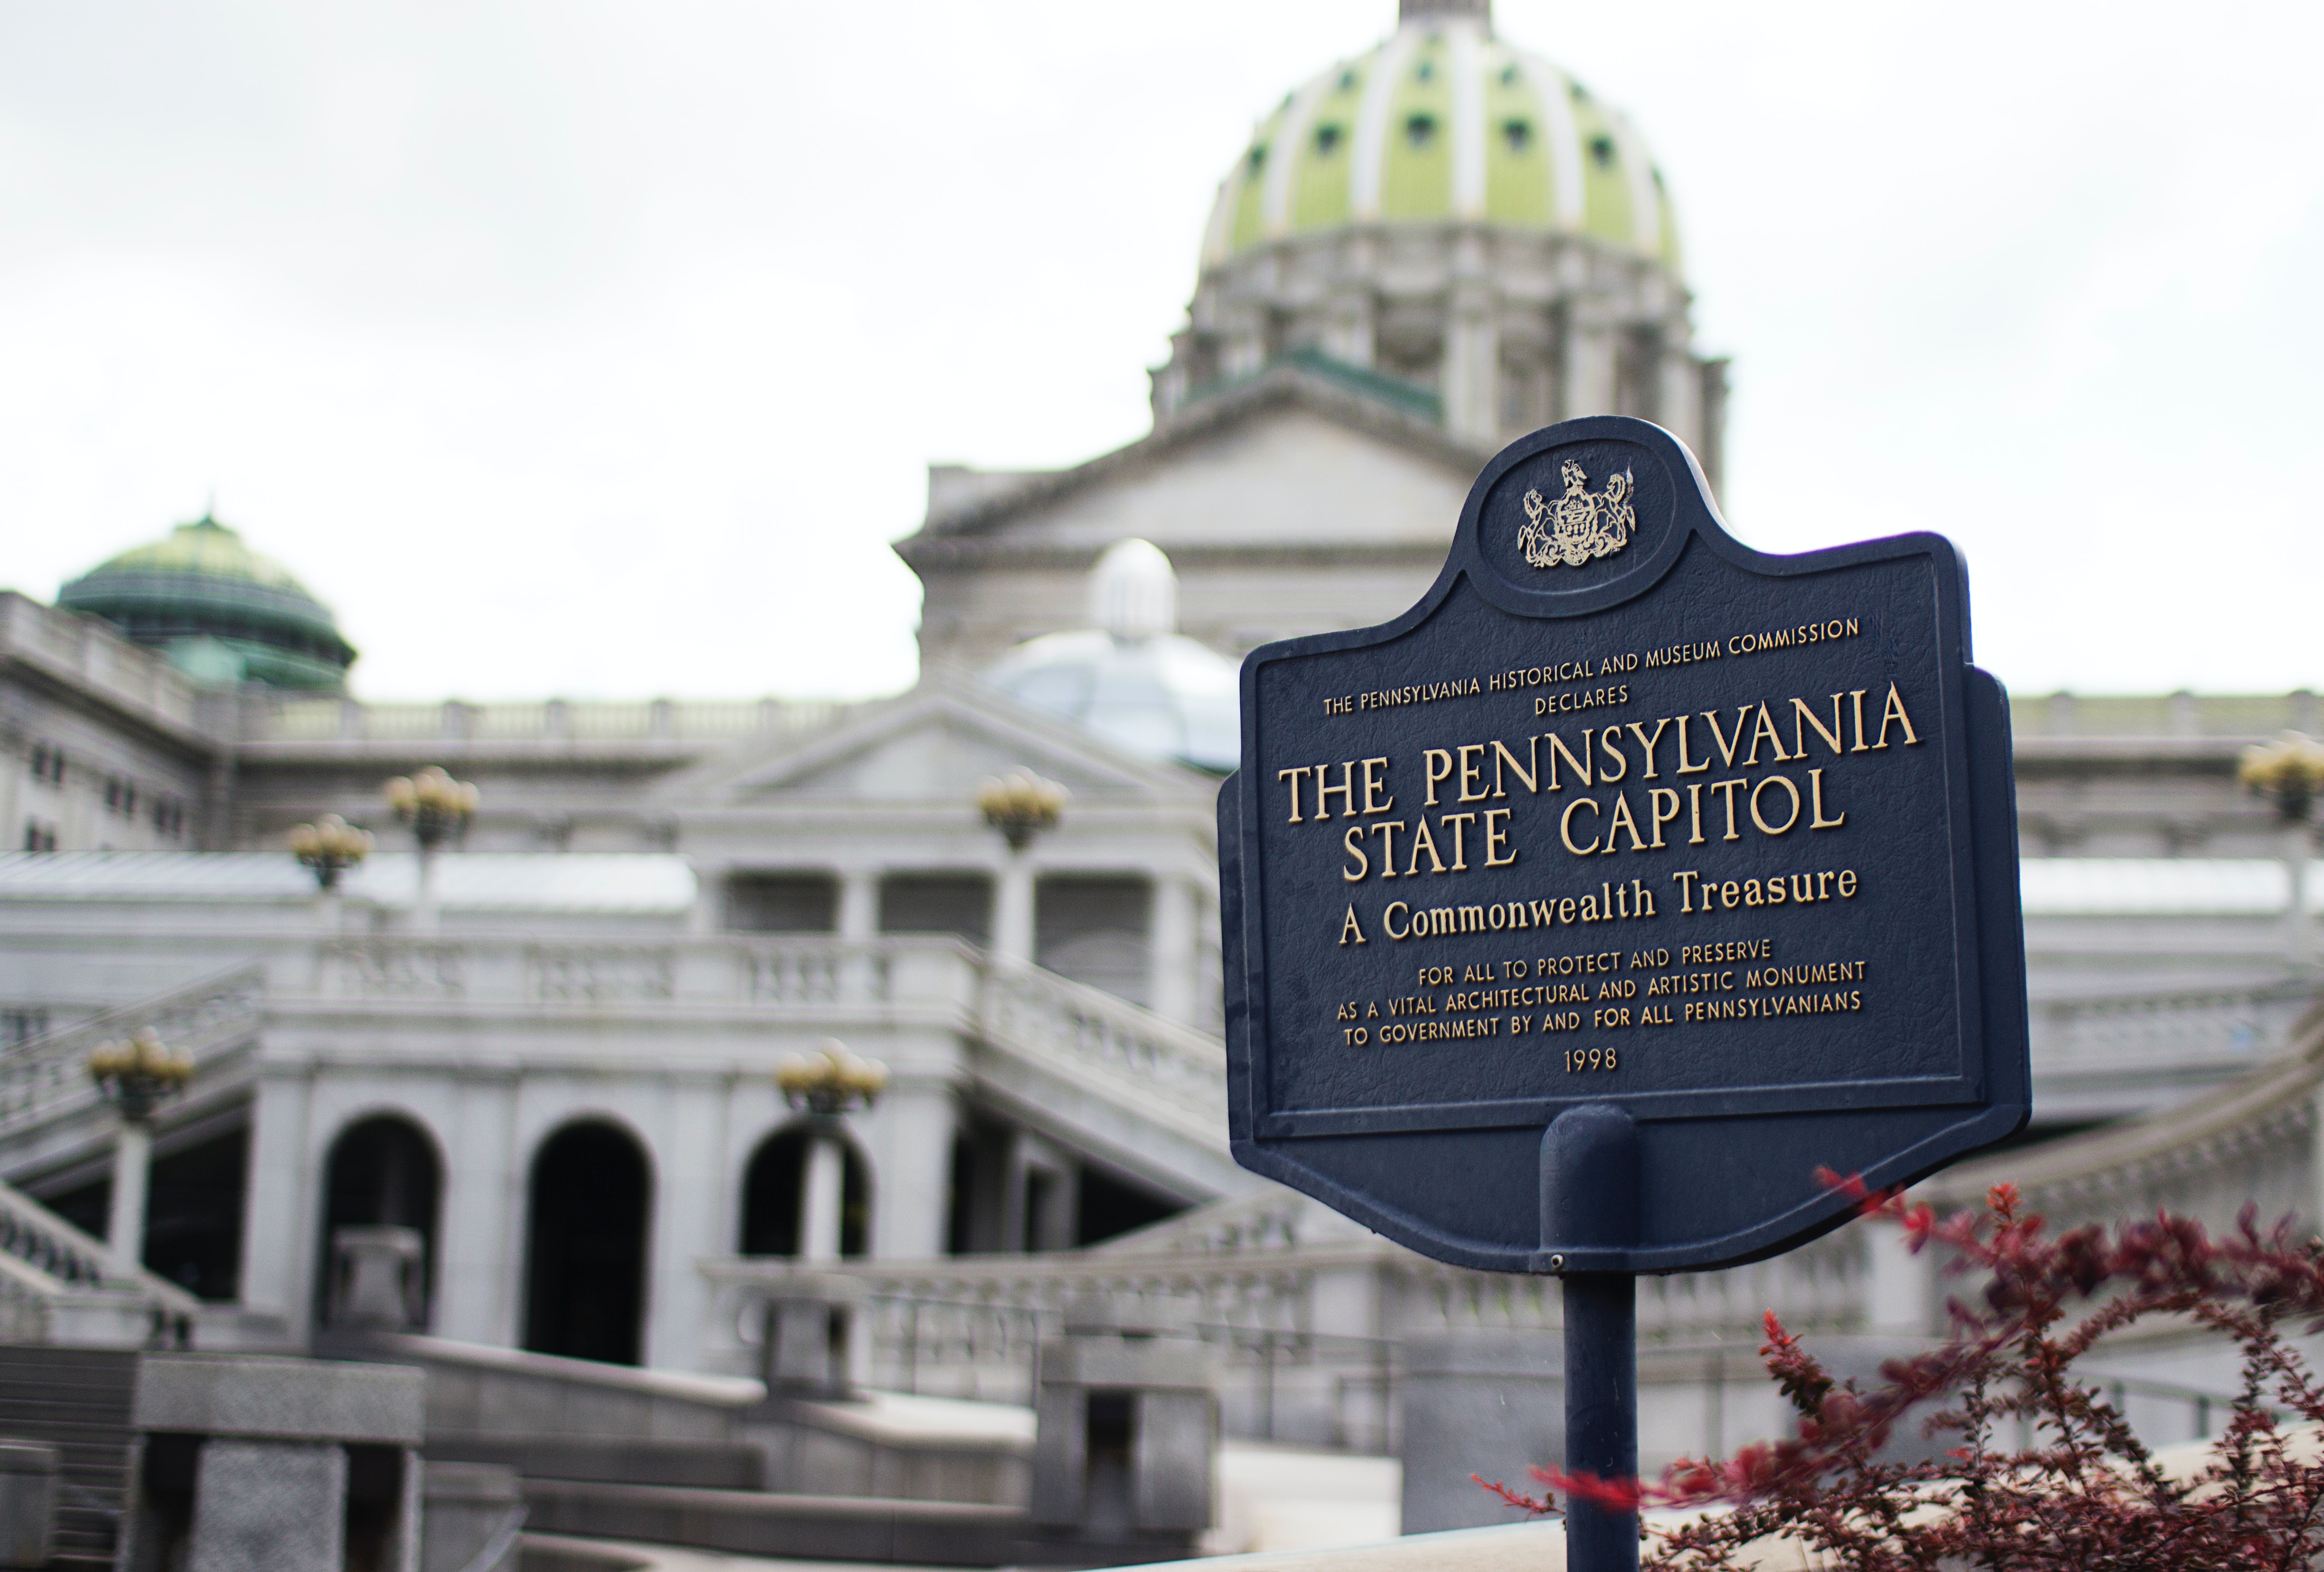 Pennsylvania state employees will begin using ChatGPT to improve the lives of citizens